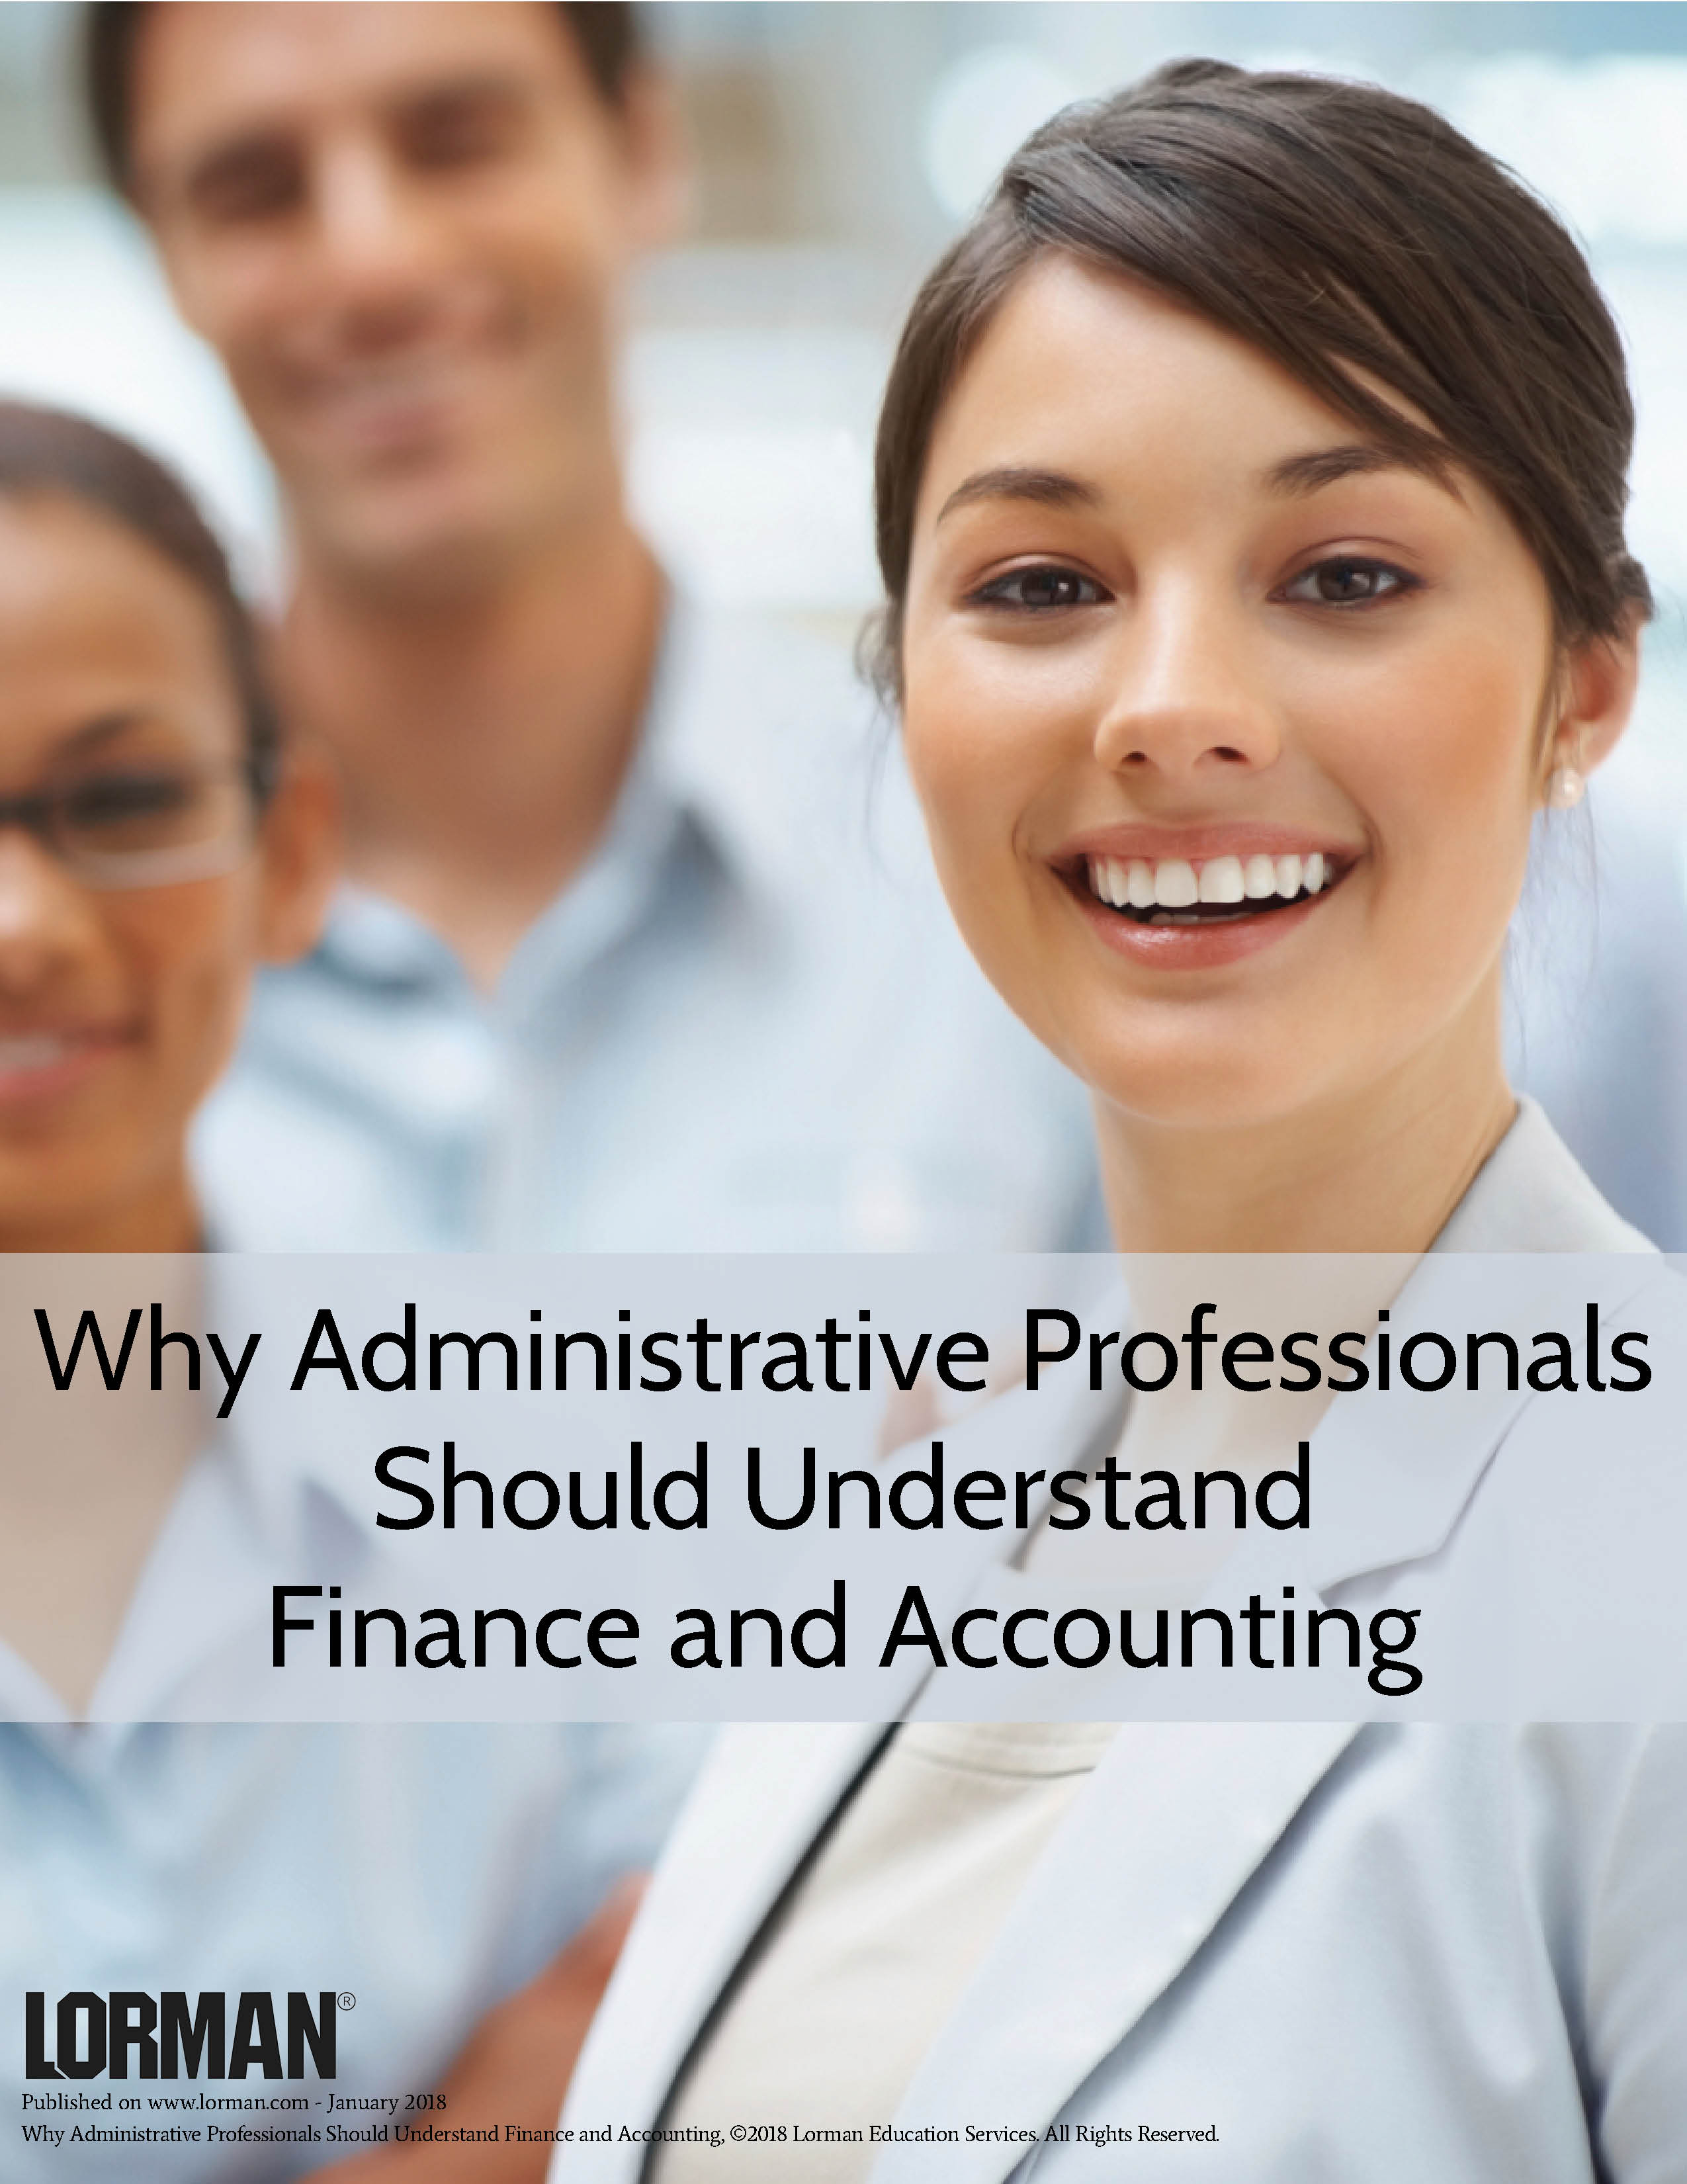 Why Administrative Professionals Should Understand Finance and Accounting